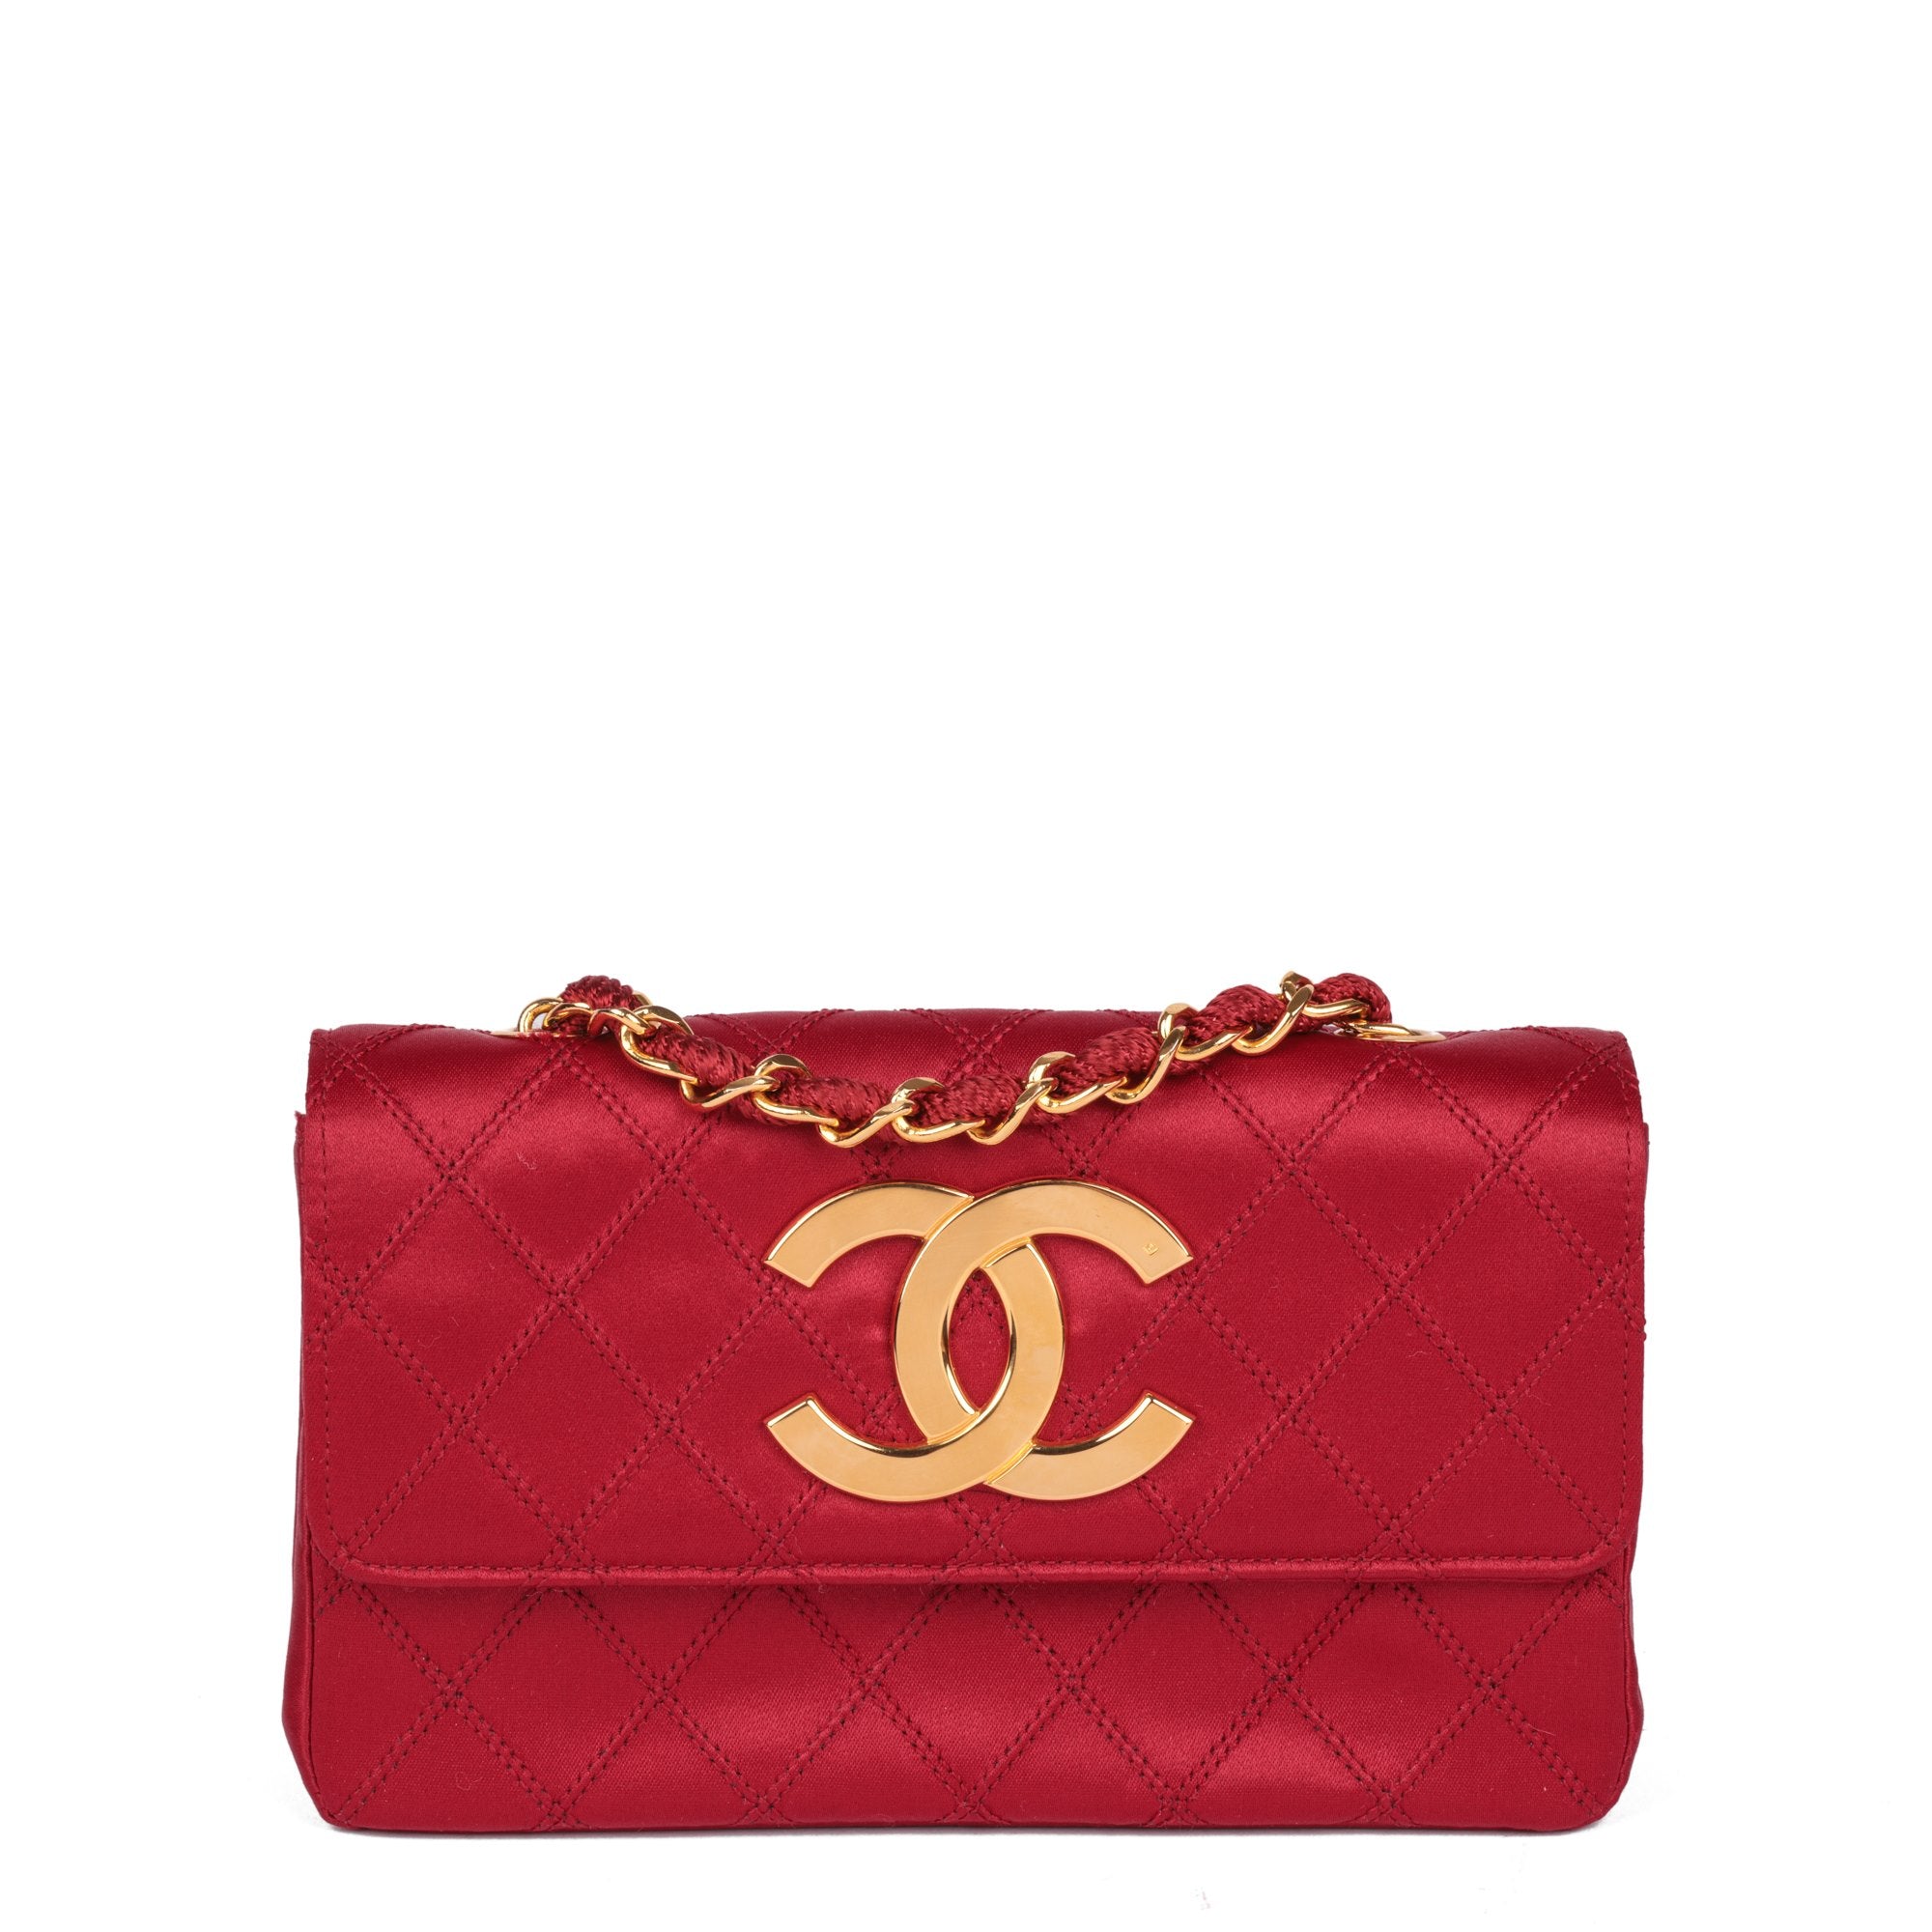 Great condition rare vintage chanel mini square in red satin and